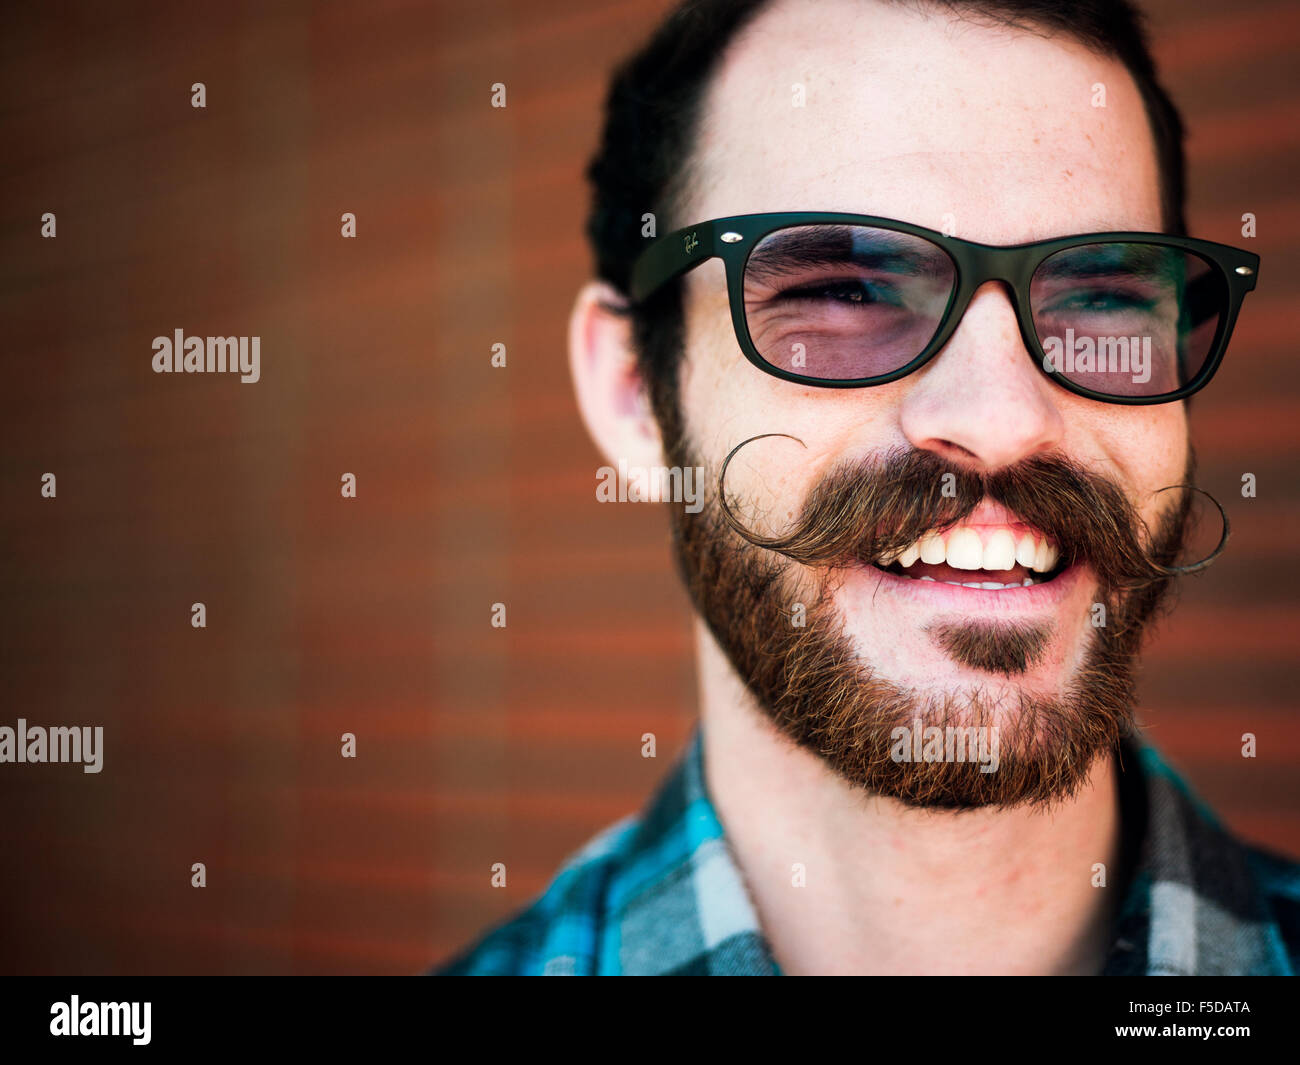 A young man with a twirled mustache smiling Stock Photo